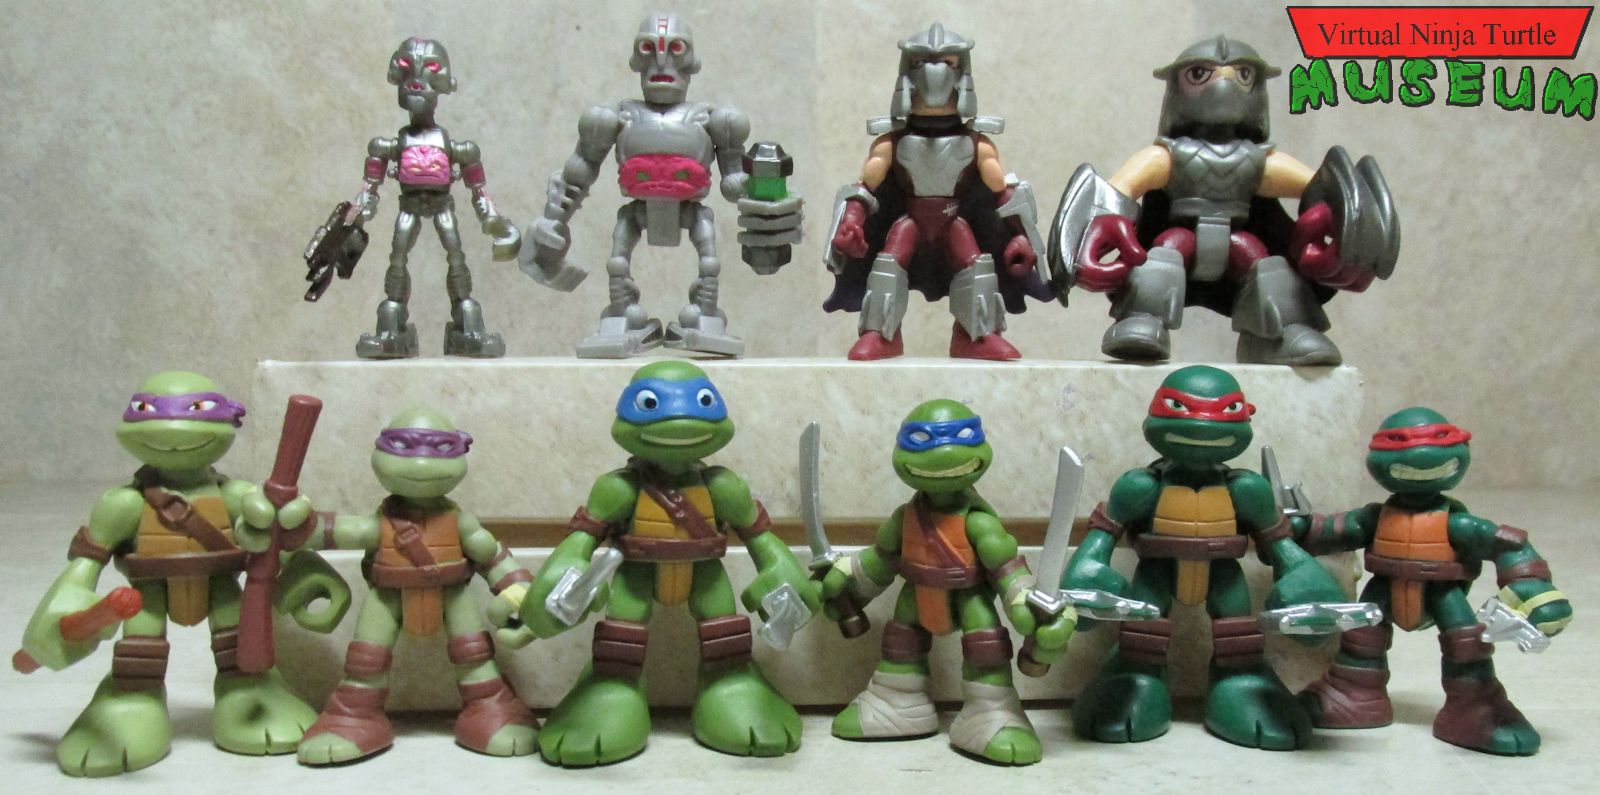 Mini-Figures with Half-Shell Heroes counterparts